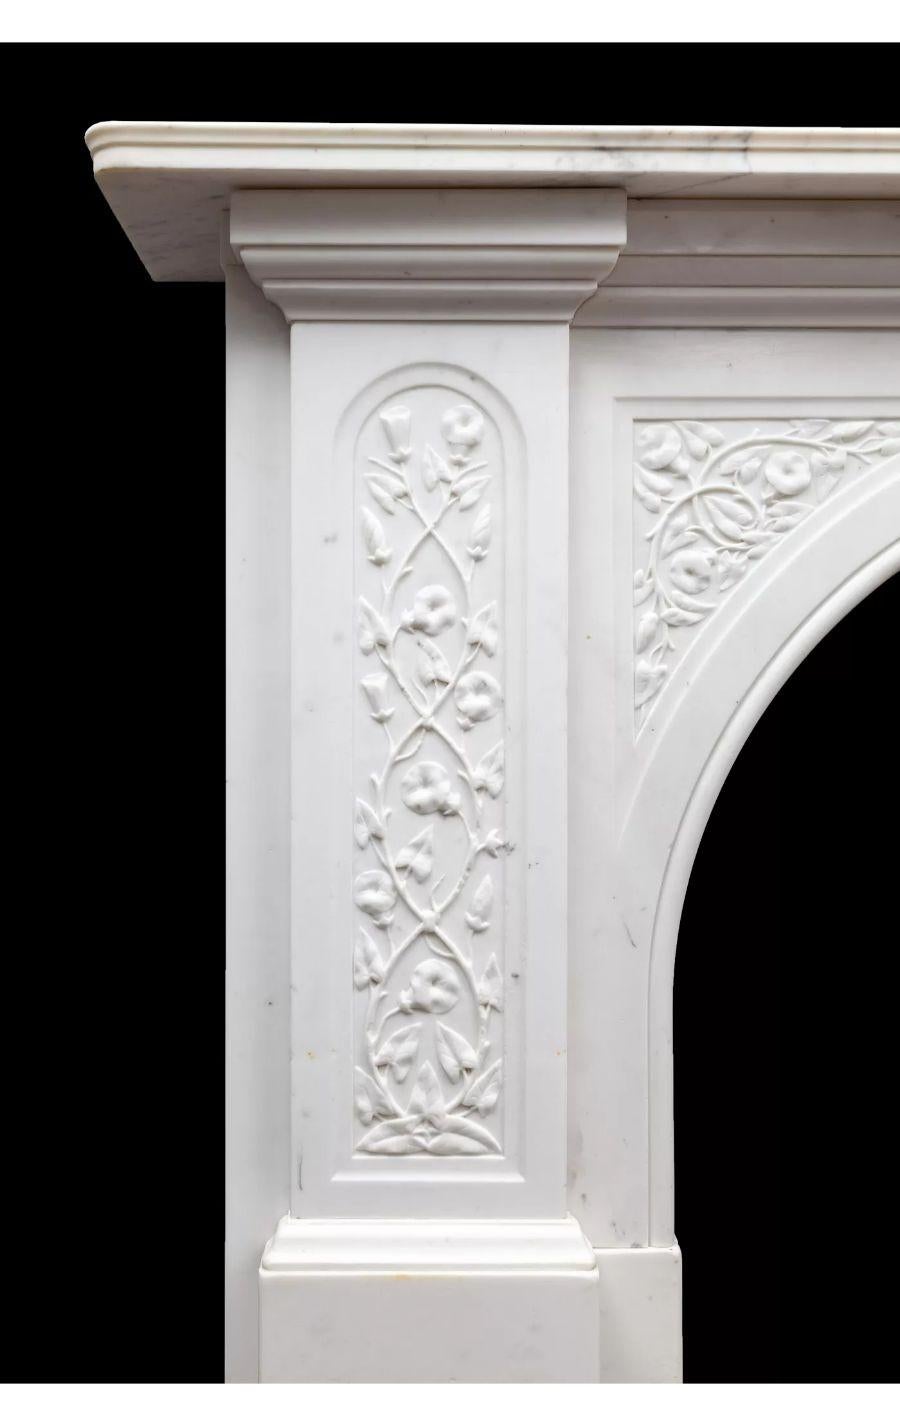 Antique Victorian Statuary Carrara Beautifully Carved Marble Mantel, circa 1880

A beautifully carved and proportioned, antique Victorian Statuary Carrara marble mantelpiece.

The D-top pilasters and arch panels carved with flowering nasturtium’s.